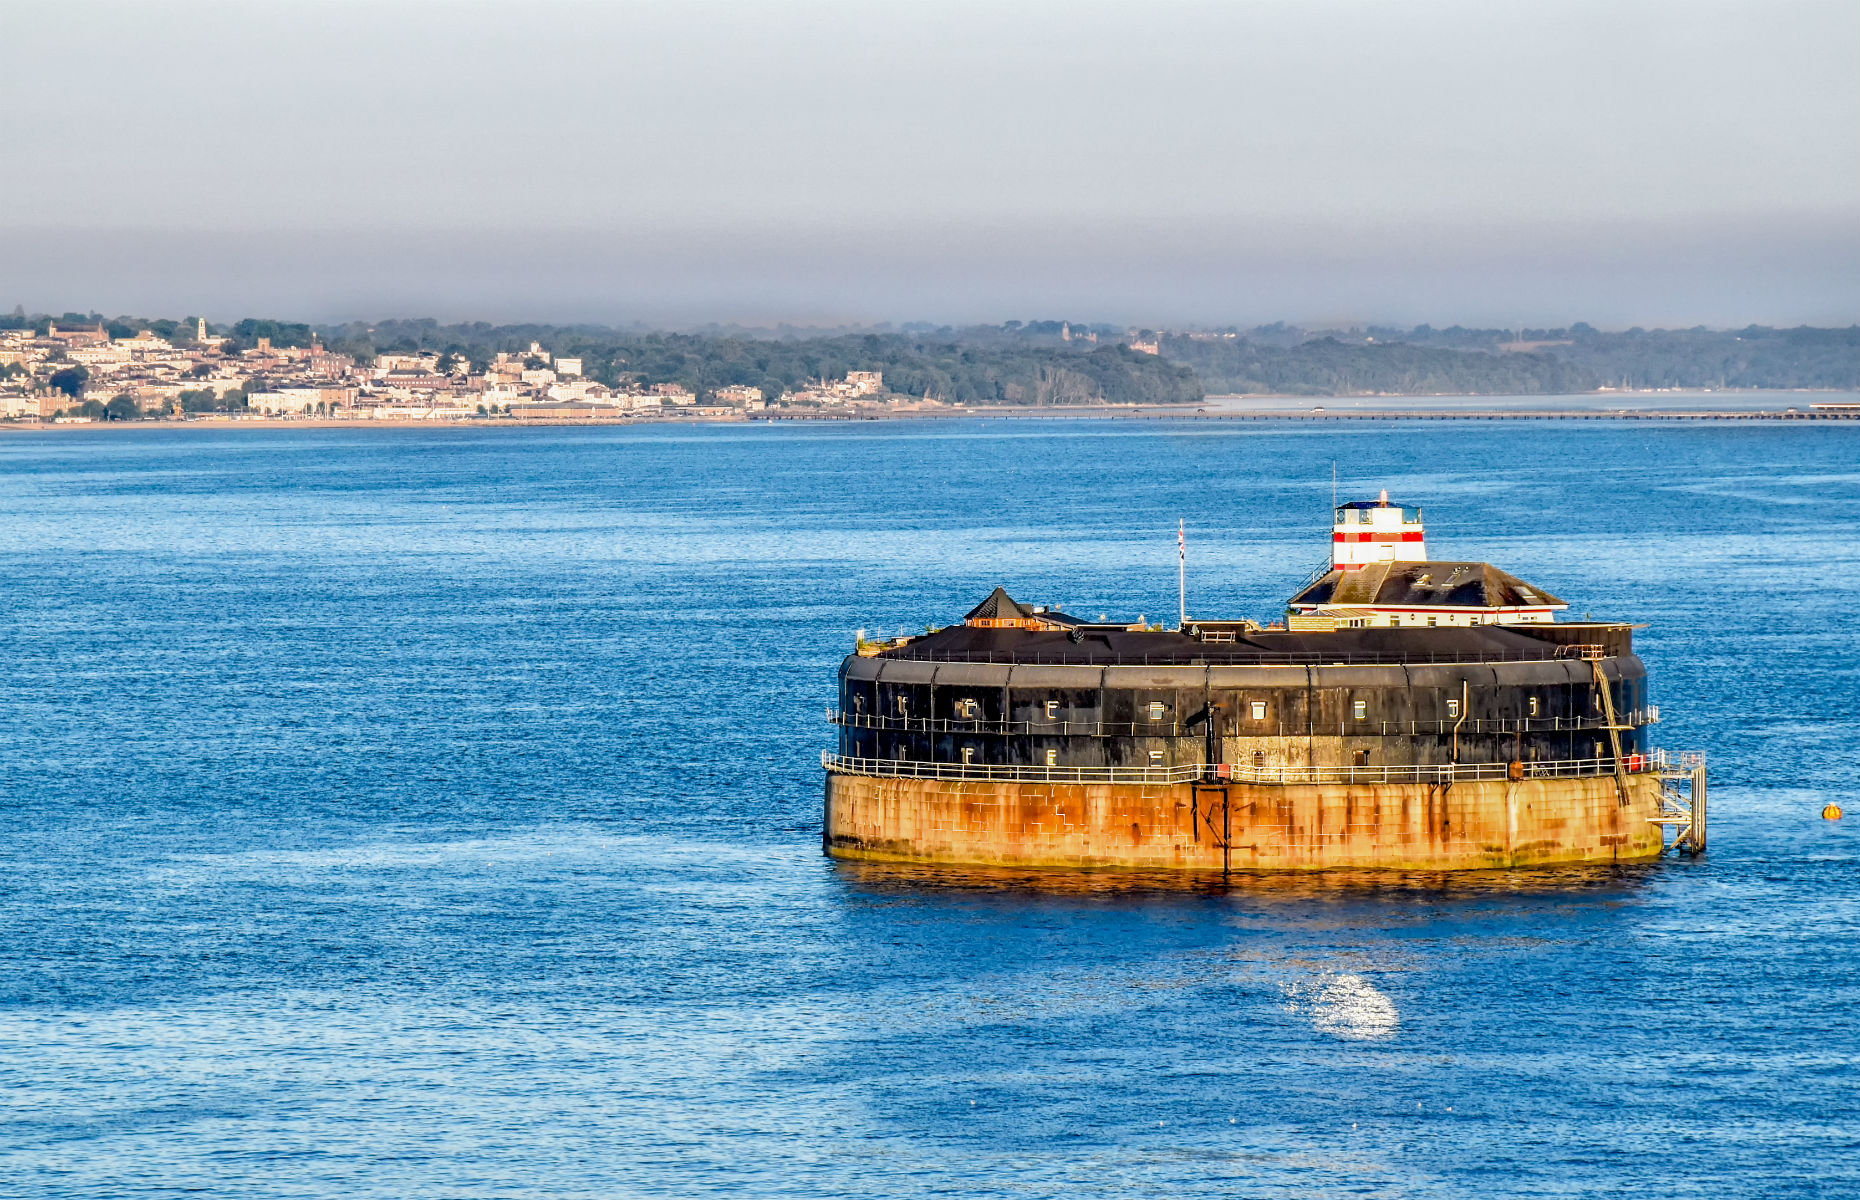 Solent fort off the coast of Portsmouth (Image: balipadma/Shutterstock)